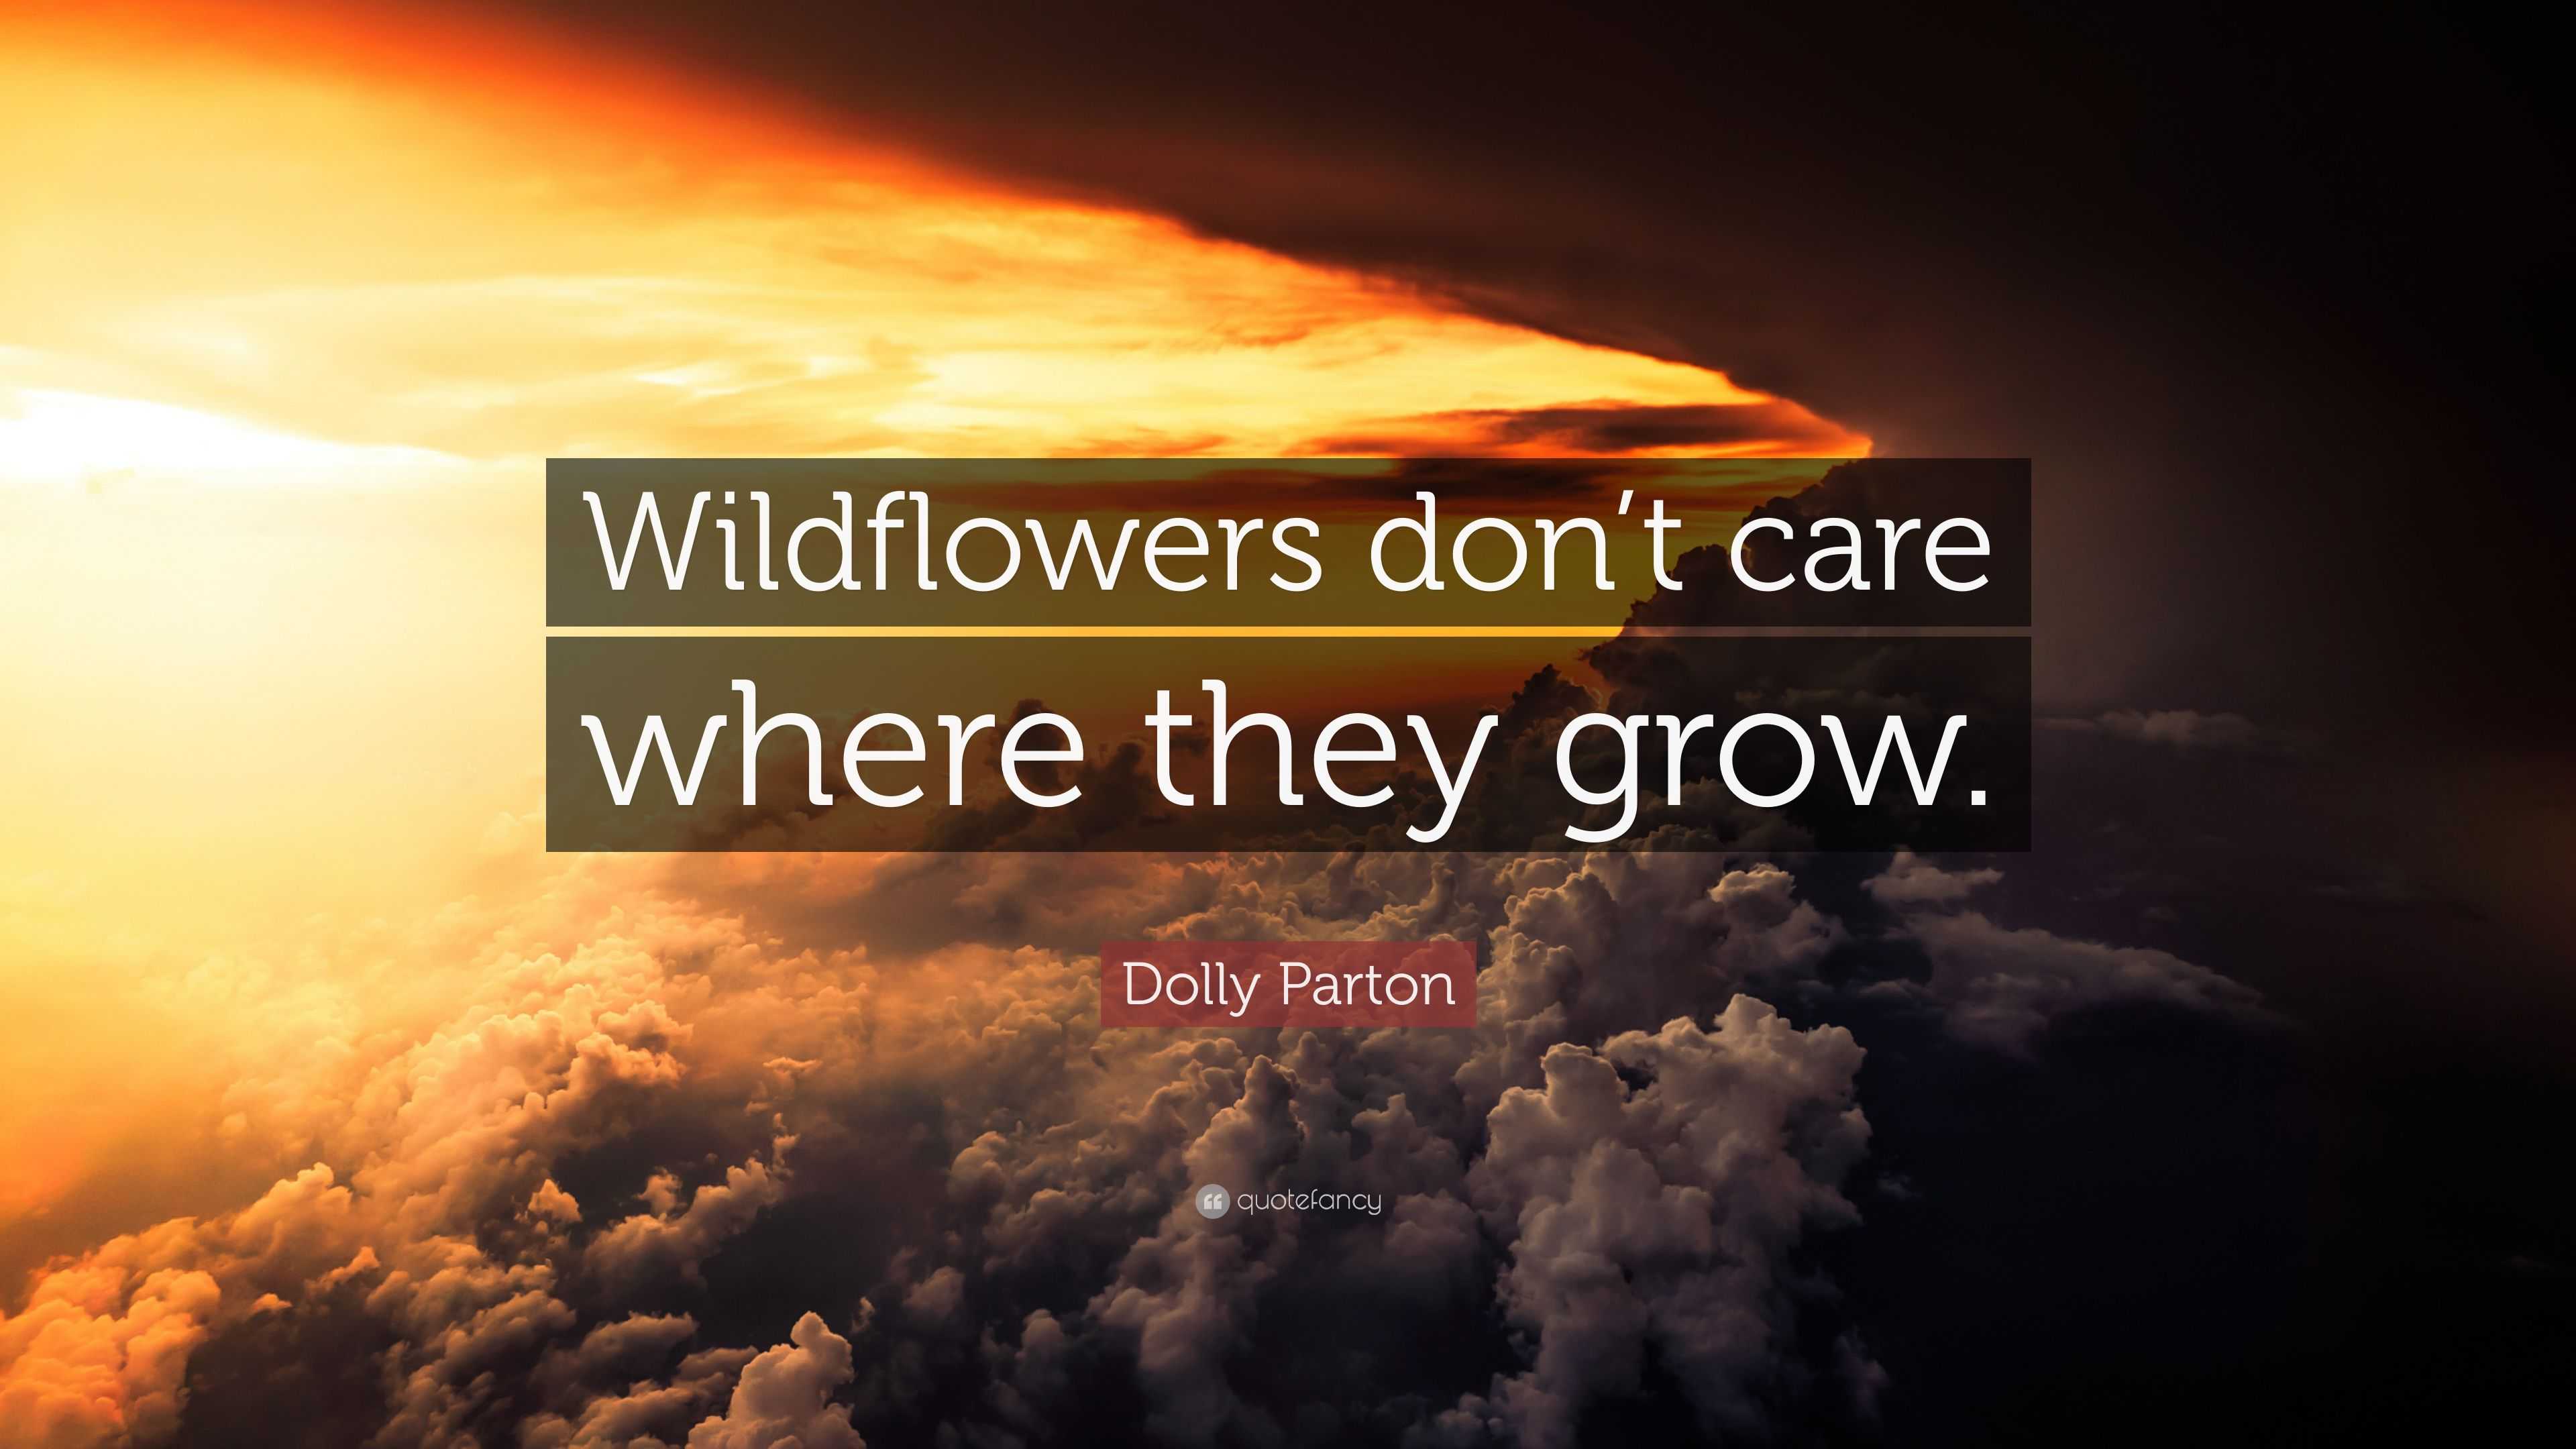 Dolly Parton Quote “Wildflowers don’t care where they grow.”